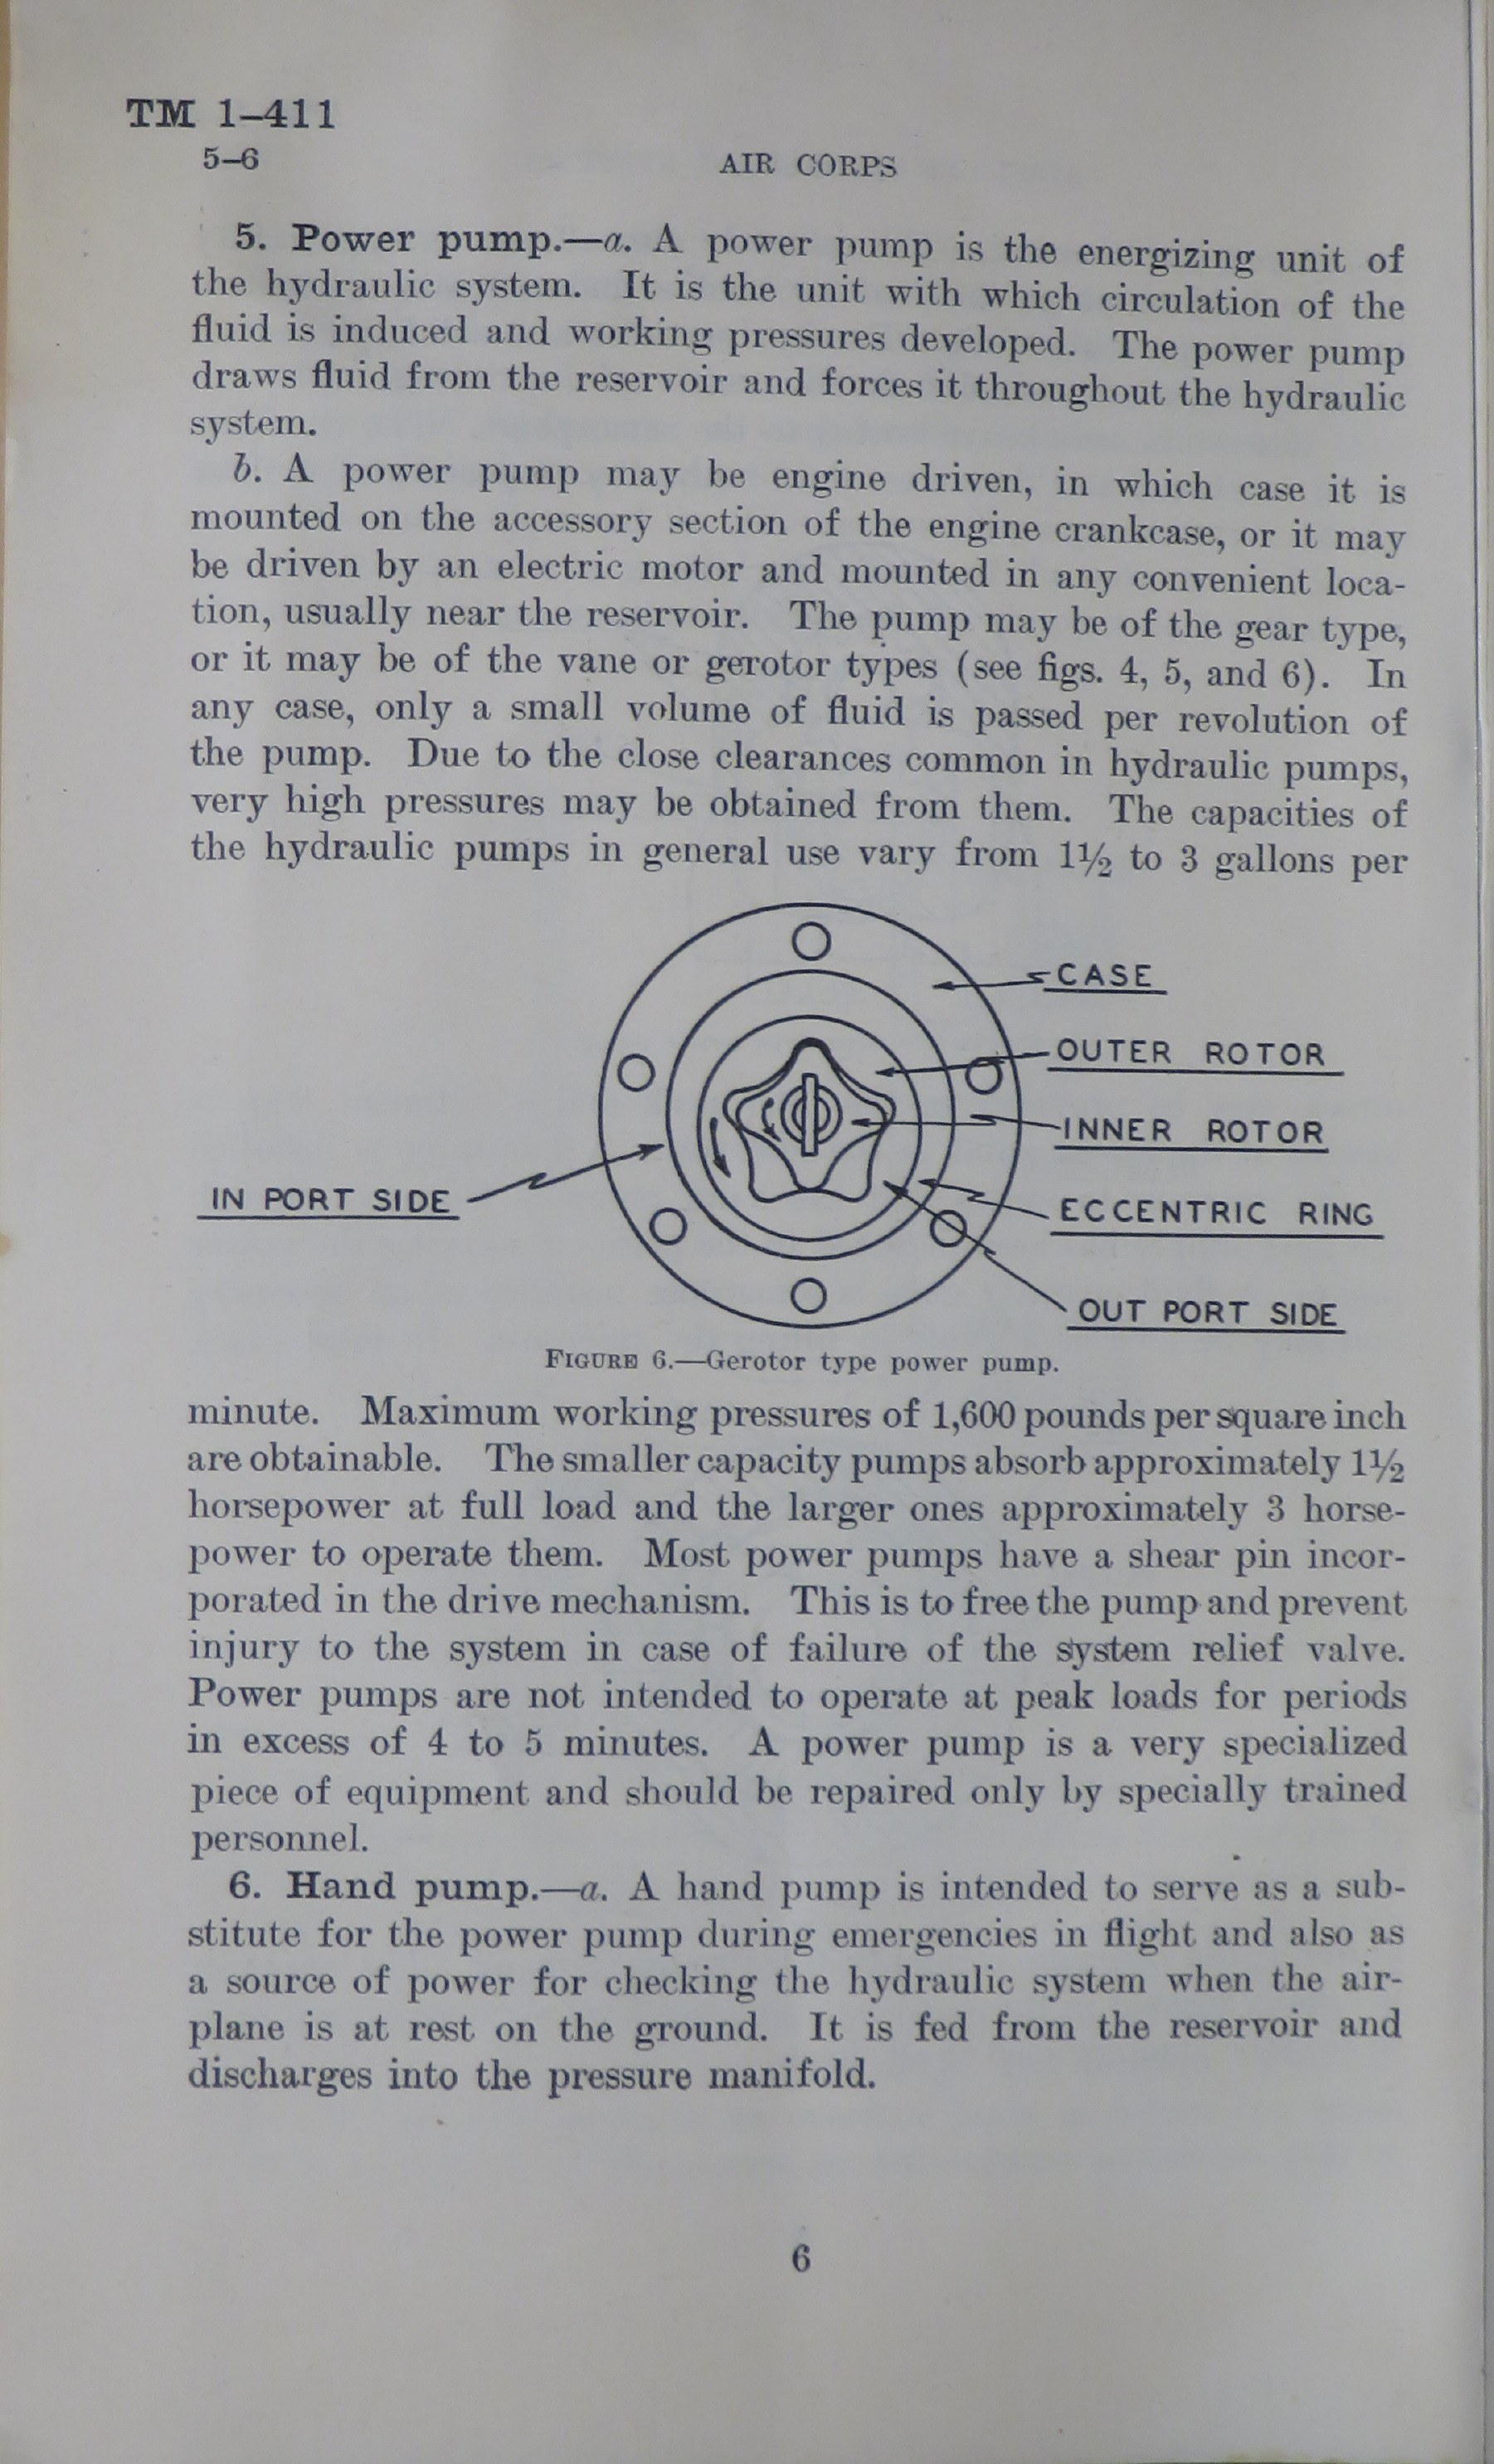 Sample page 8 from AirCorps Library document: Airplane Hydraulic Systems and Miscellaneous Equipment